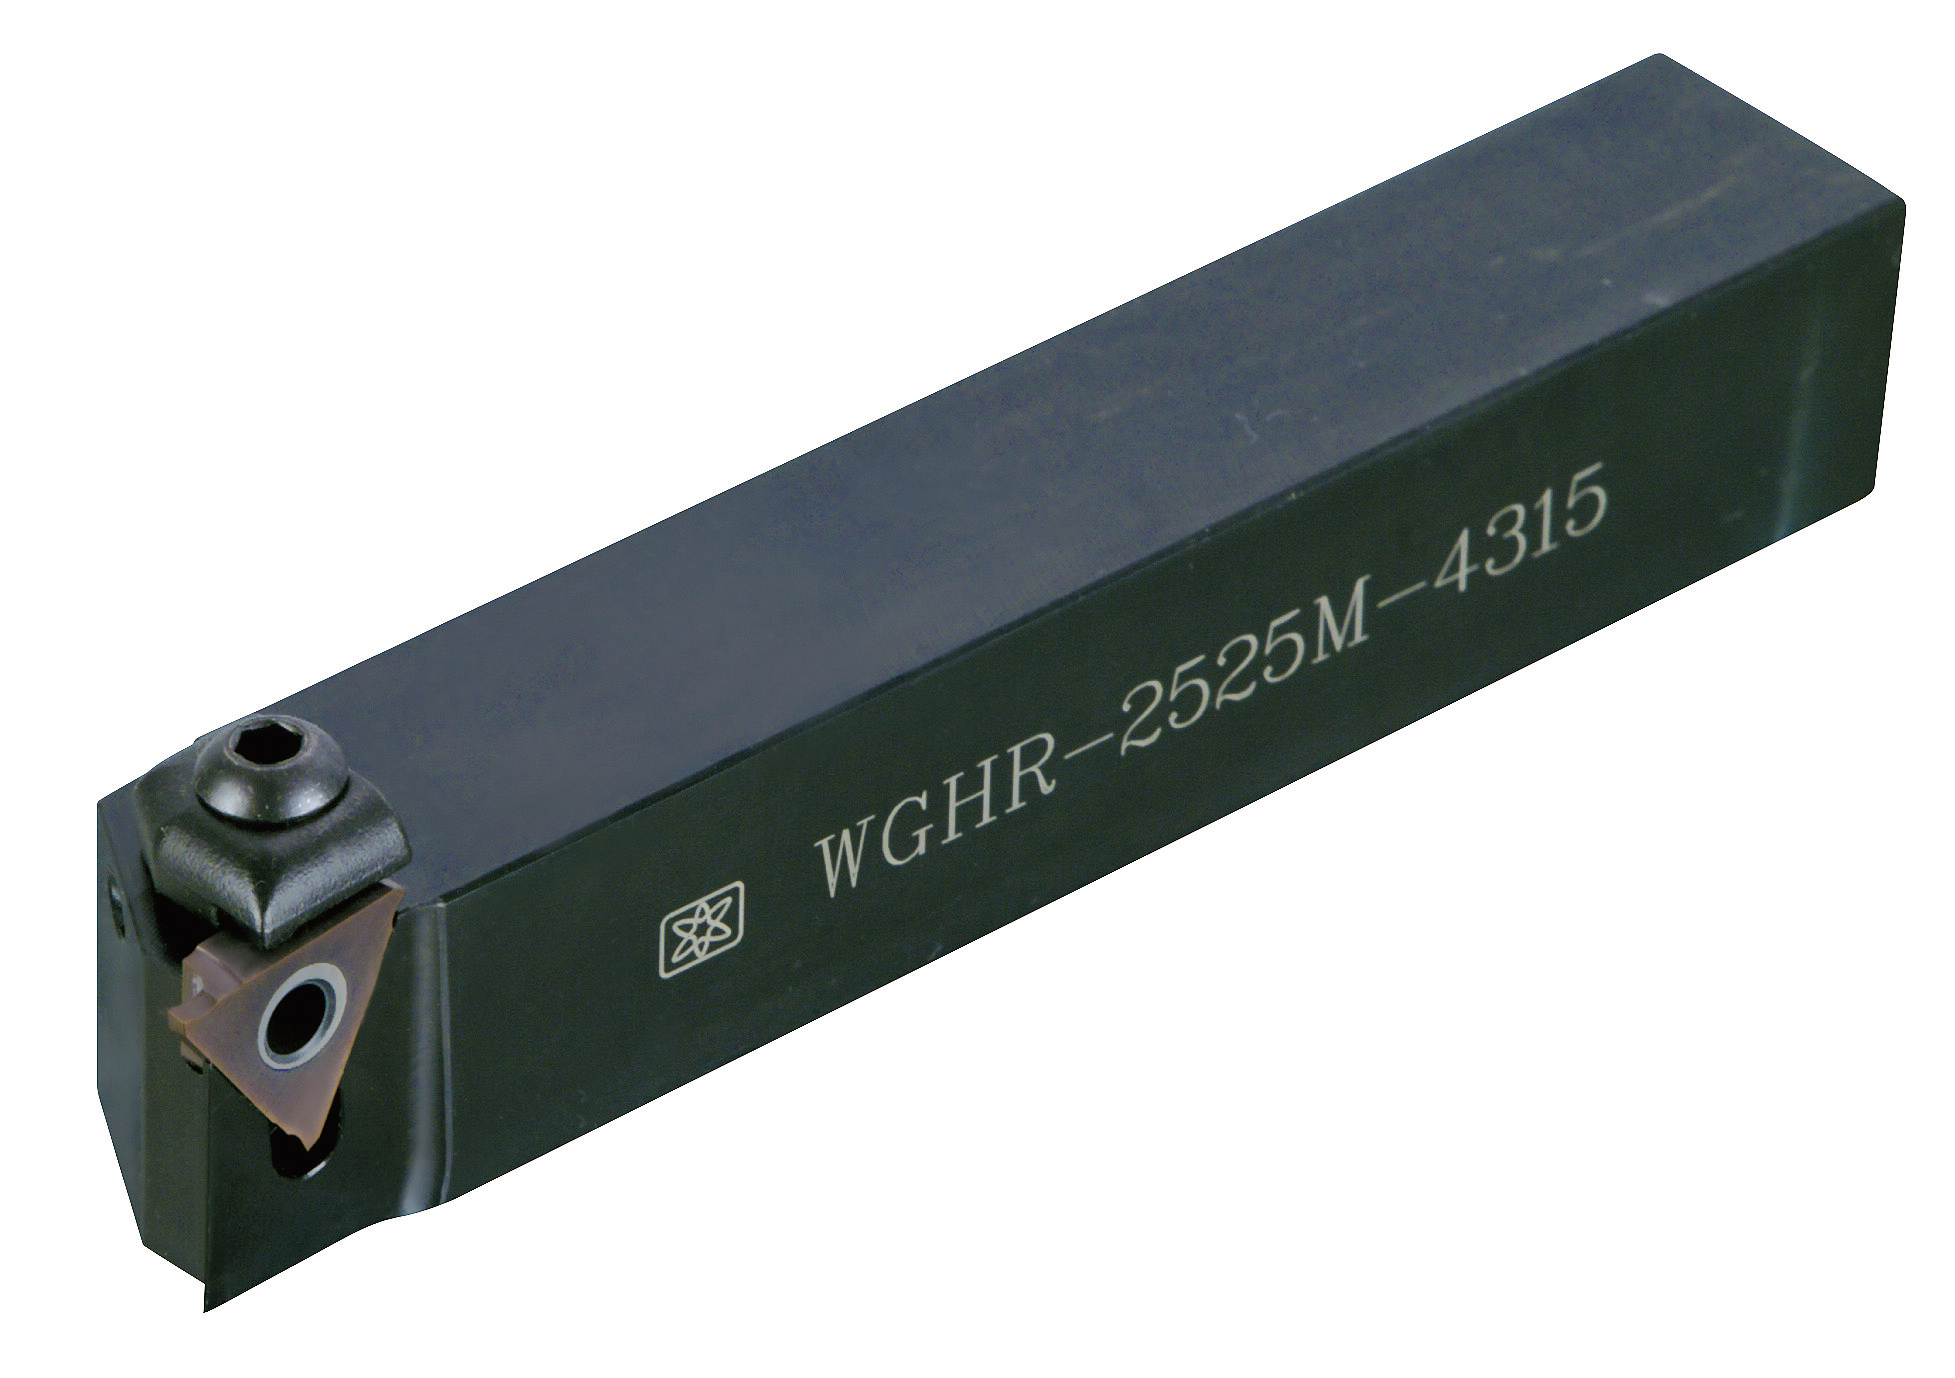 Products|WGHR (MGTR33125~33400 / WGTR43125~43470) External Grooving Tool Holder